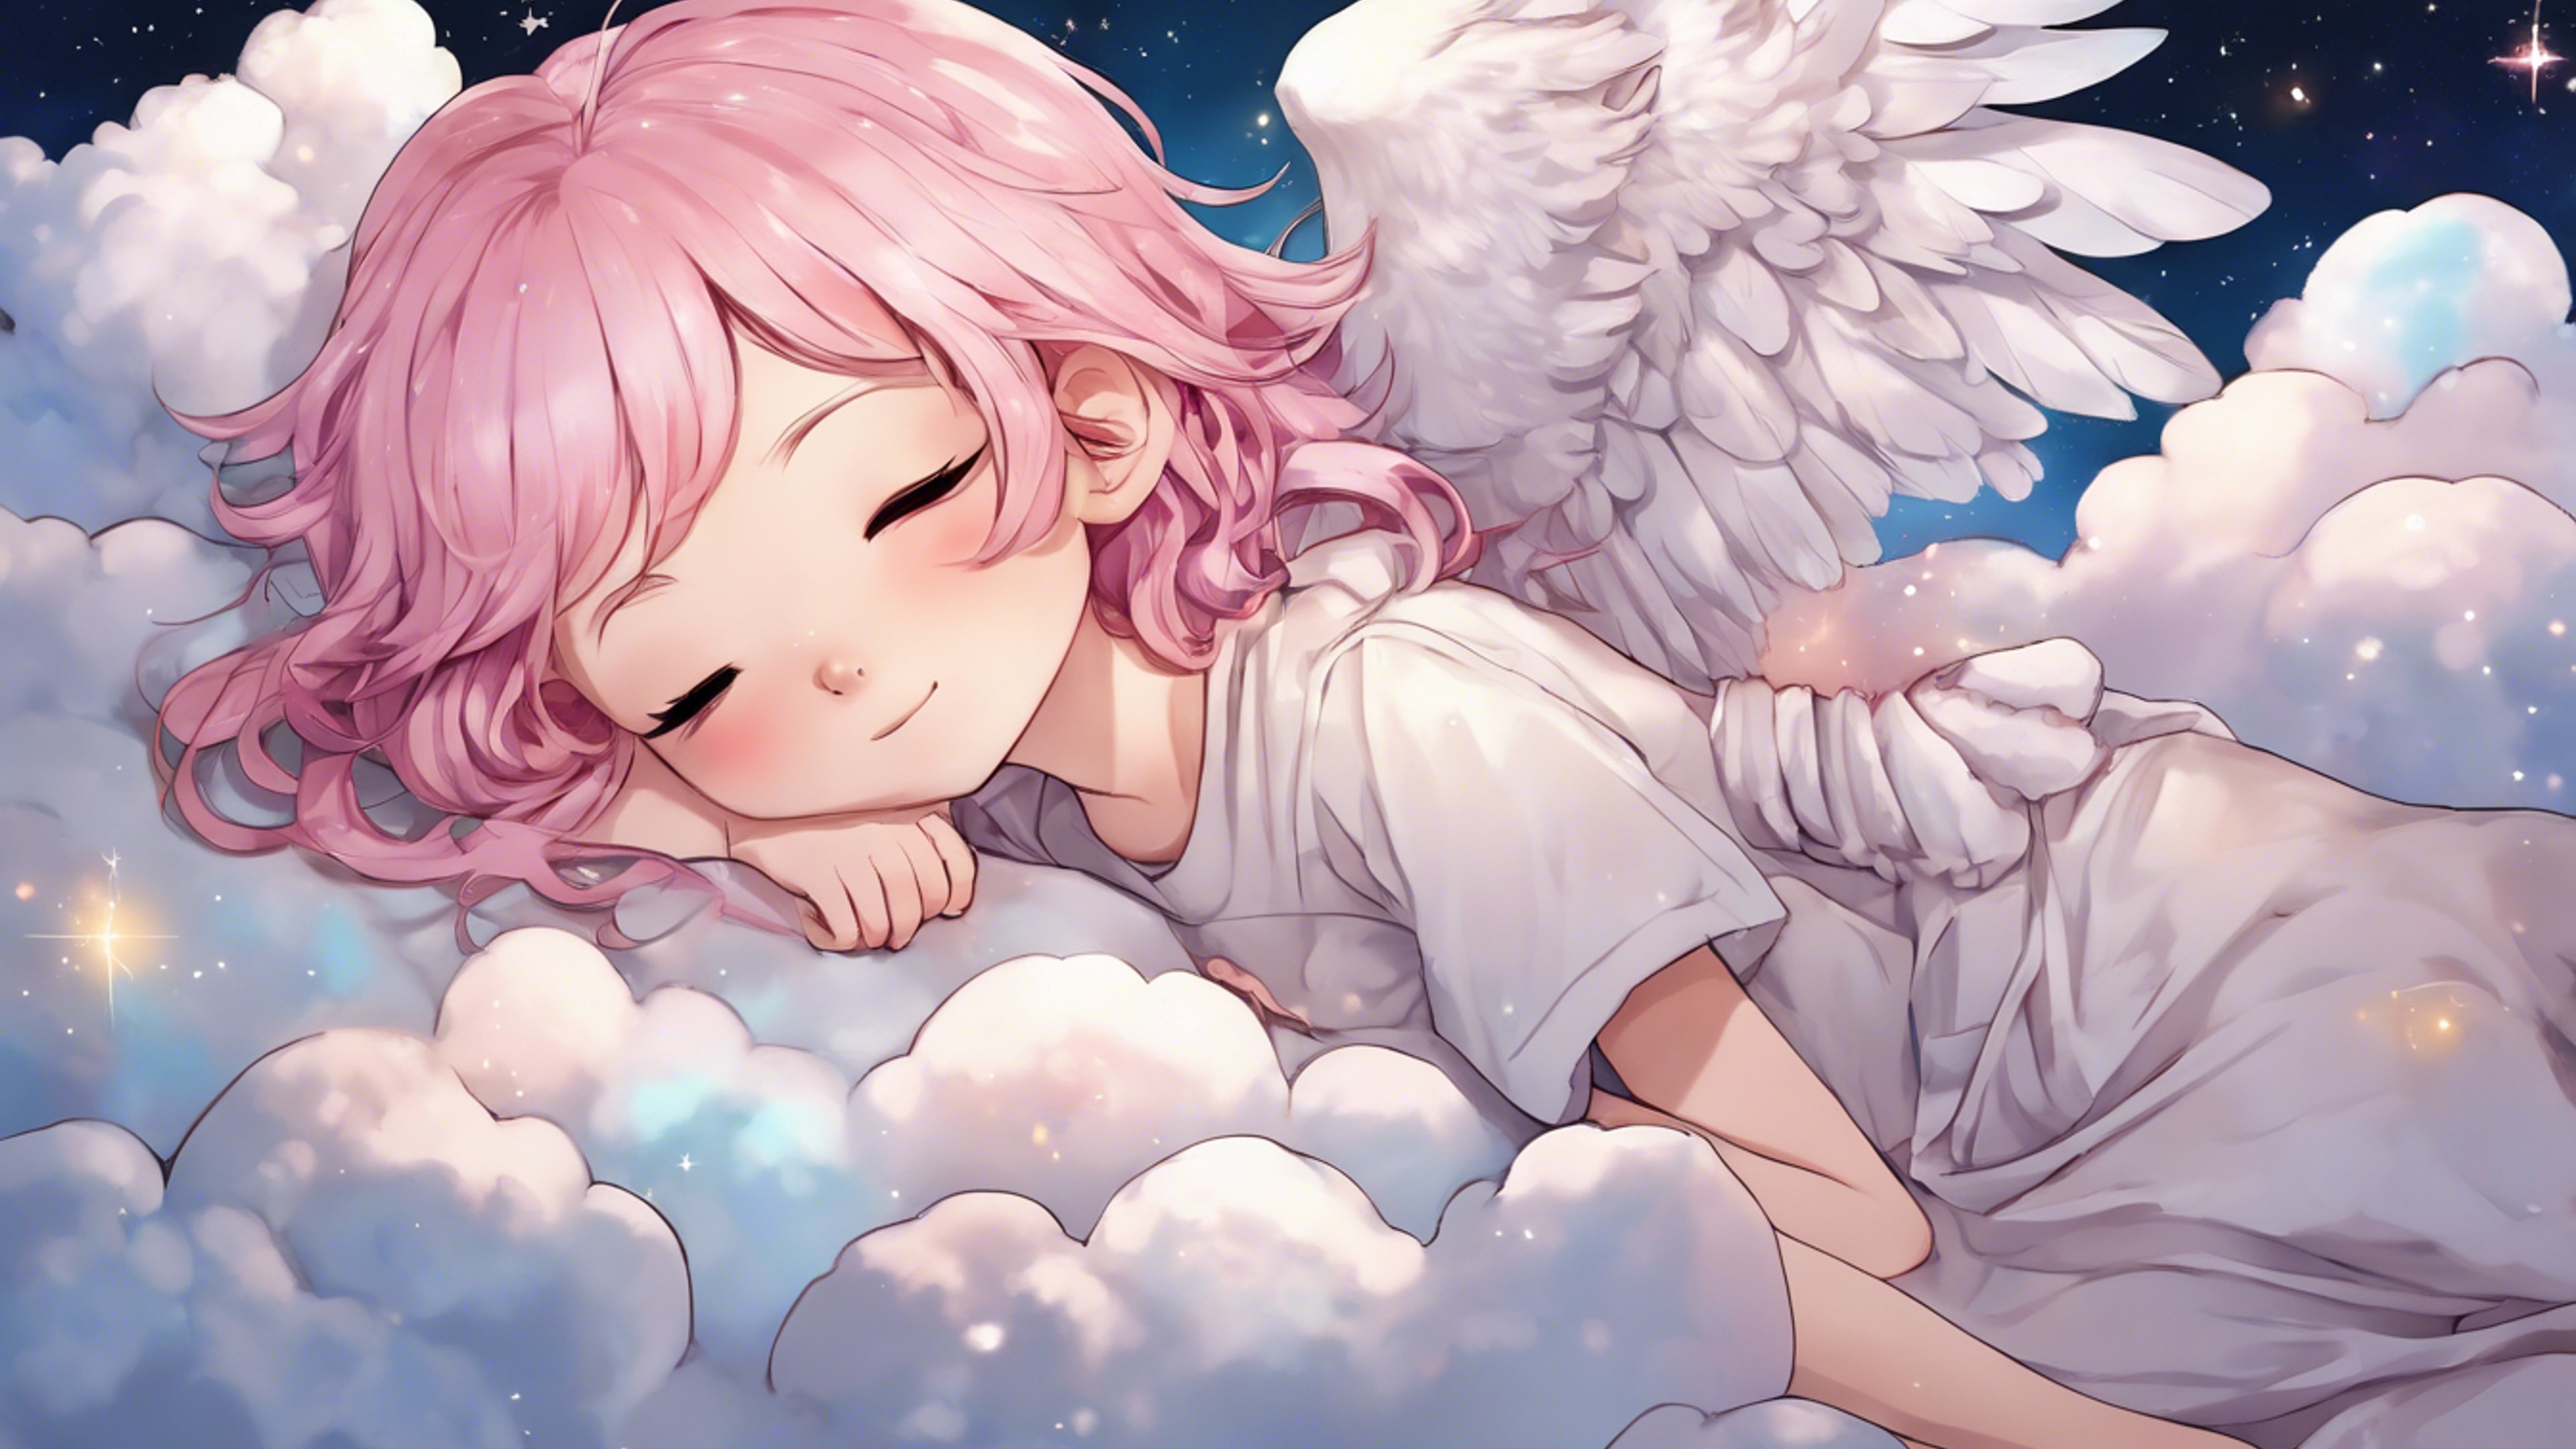 A chibi-style anime girl with pastel pink hair and angel wings, sleeping peacefully on a fluffy cloud under a starry night sky. Wallpaper[4a6f35b80bd74bd2872d]